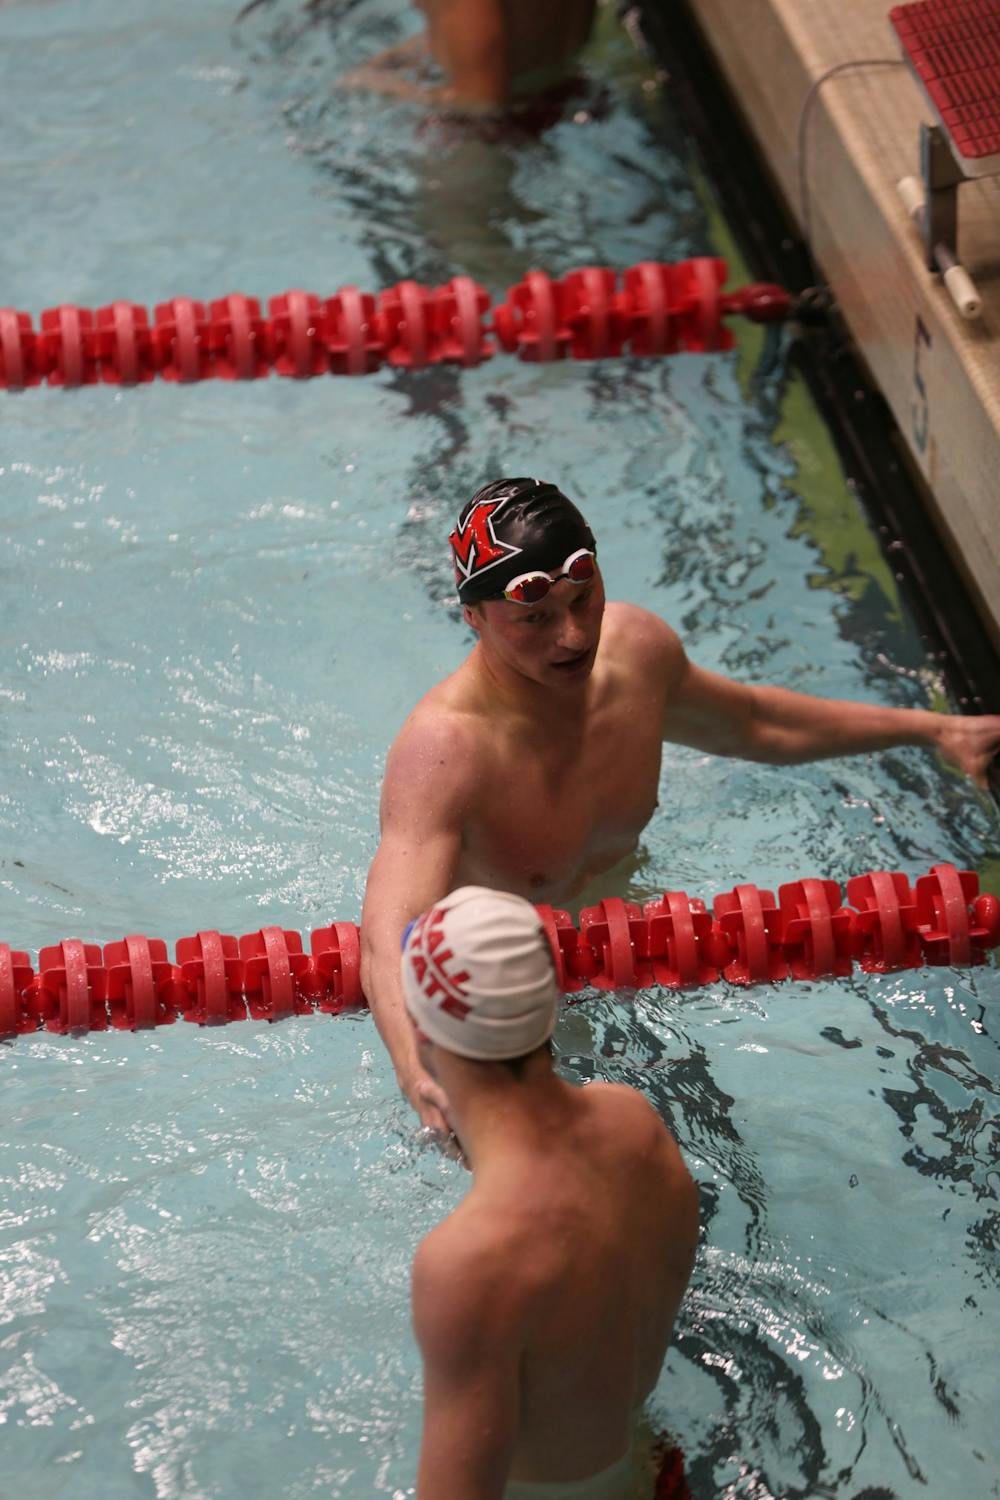 Miami's Owen Blazer shacks hands with Ball State's Ethan Peifer after swimming the 200 yard backstroke Oct. 28 in Lewellen Aquatic Center. Blazer won the event with a time of 1:55.89. Eli Houser, DN 